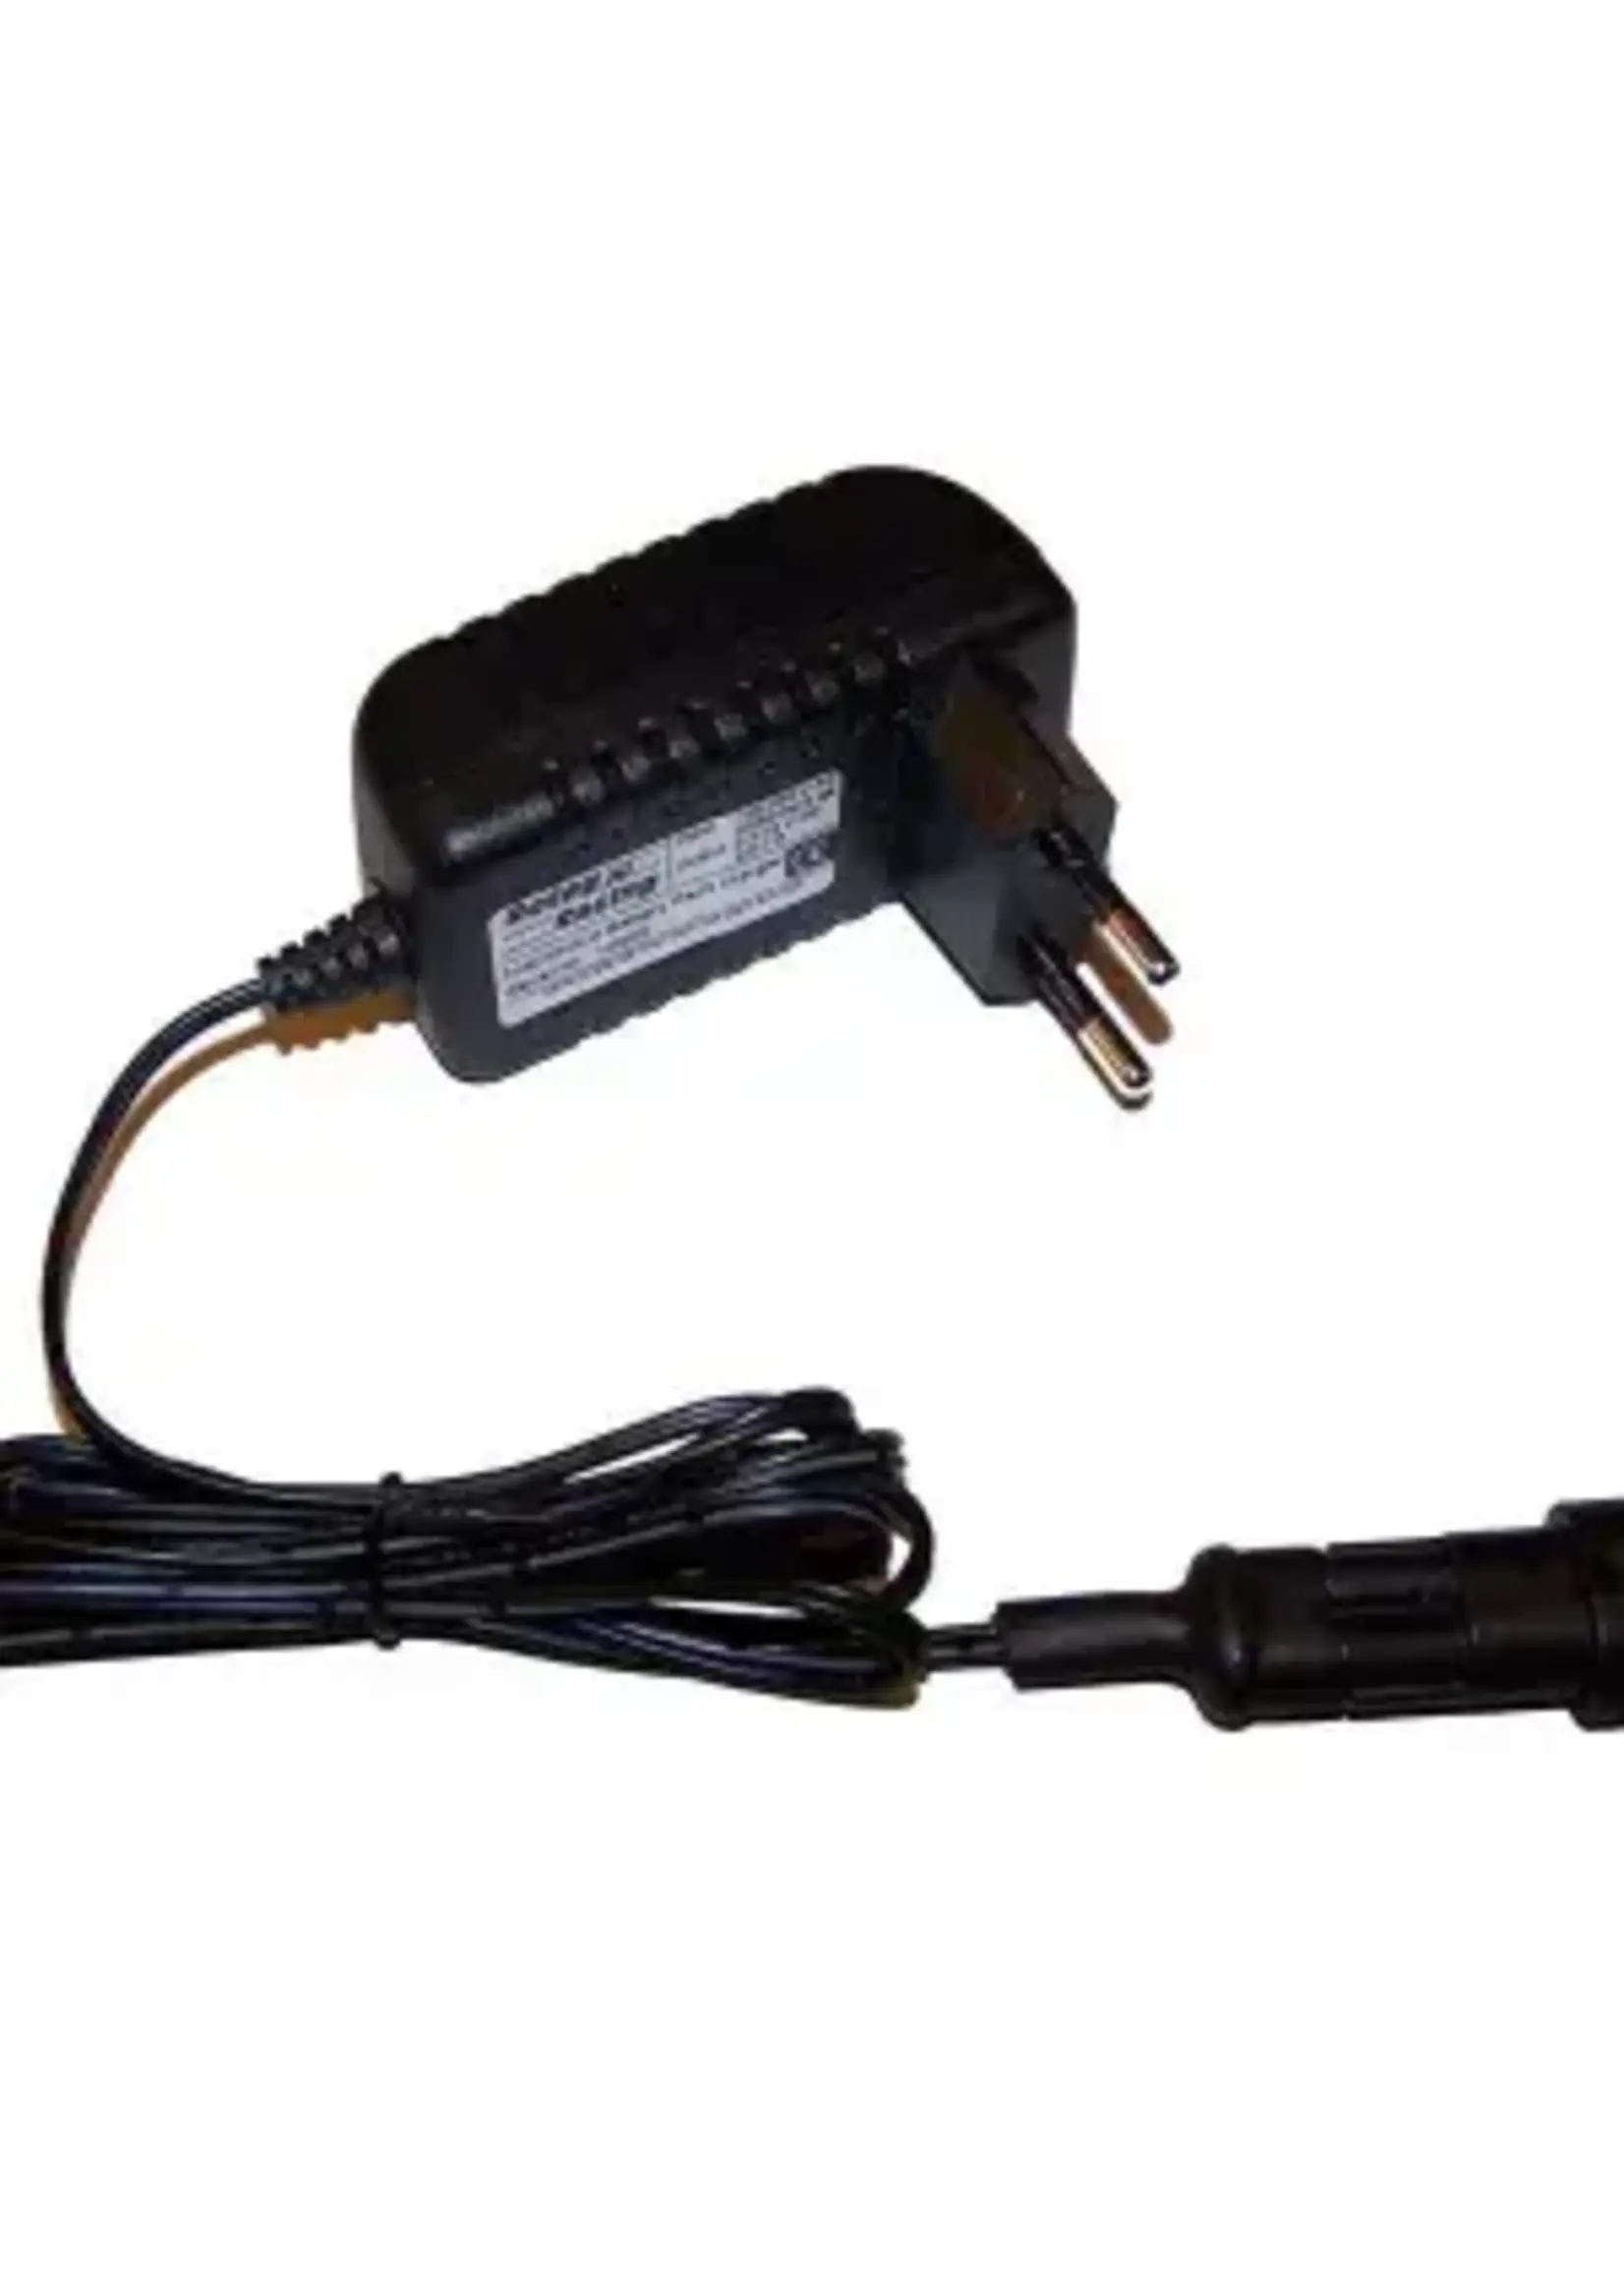 AIM BATTERY CHARGER FOR 2.4-12 V NIMH BATTERIES WITH AMP SUPER SEAL CONN.